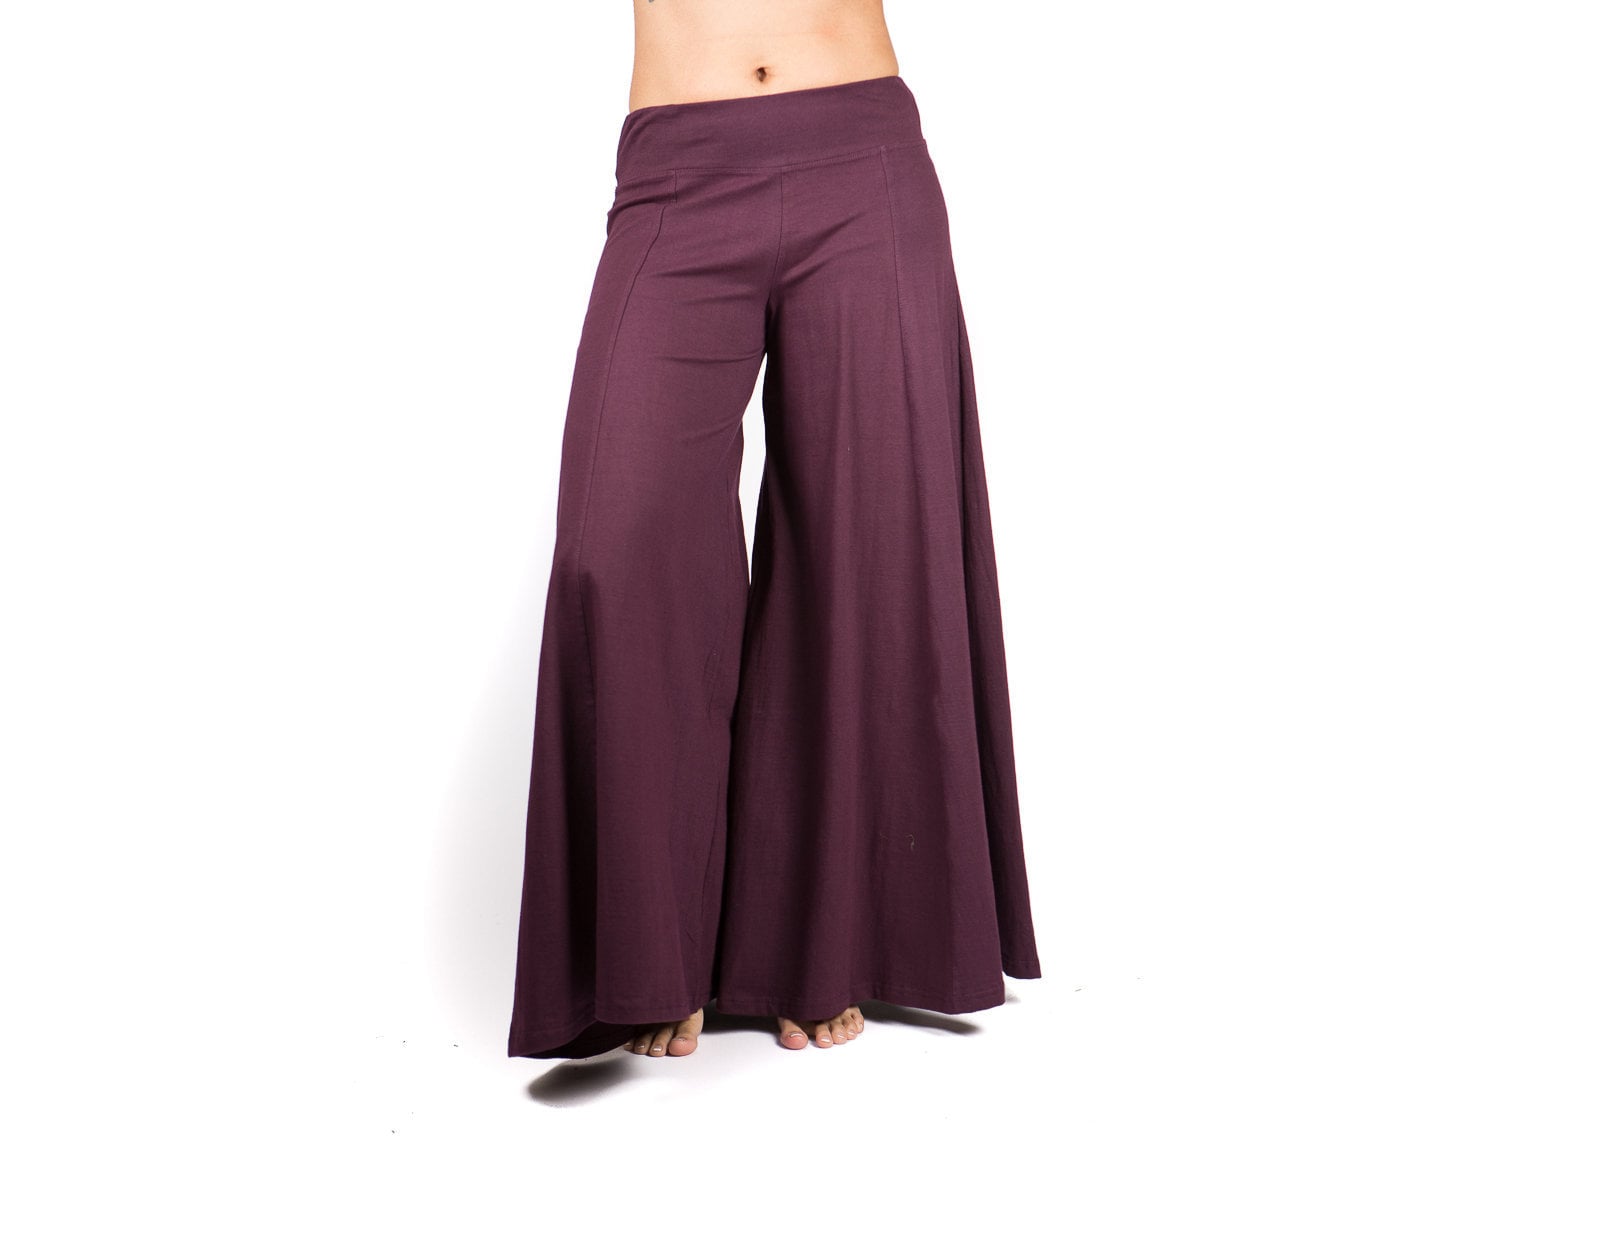 Native American Inspired Pants and Clothing for Women, Tribal Cotton Pants,  Embroidery Pants, Aladdin Pants, America Indian Pants, Nomadic 